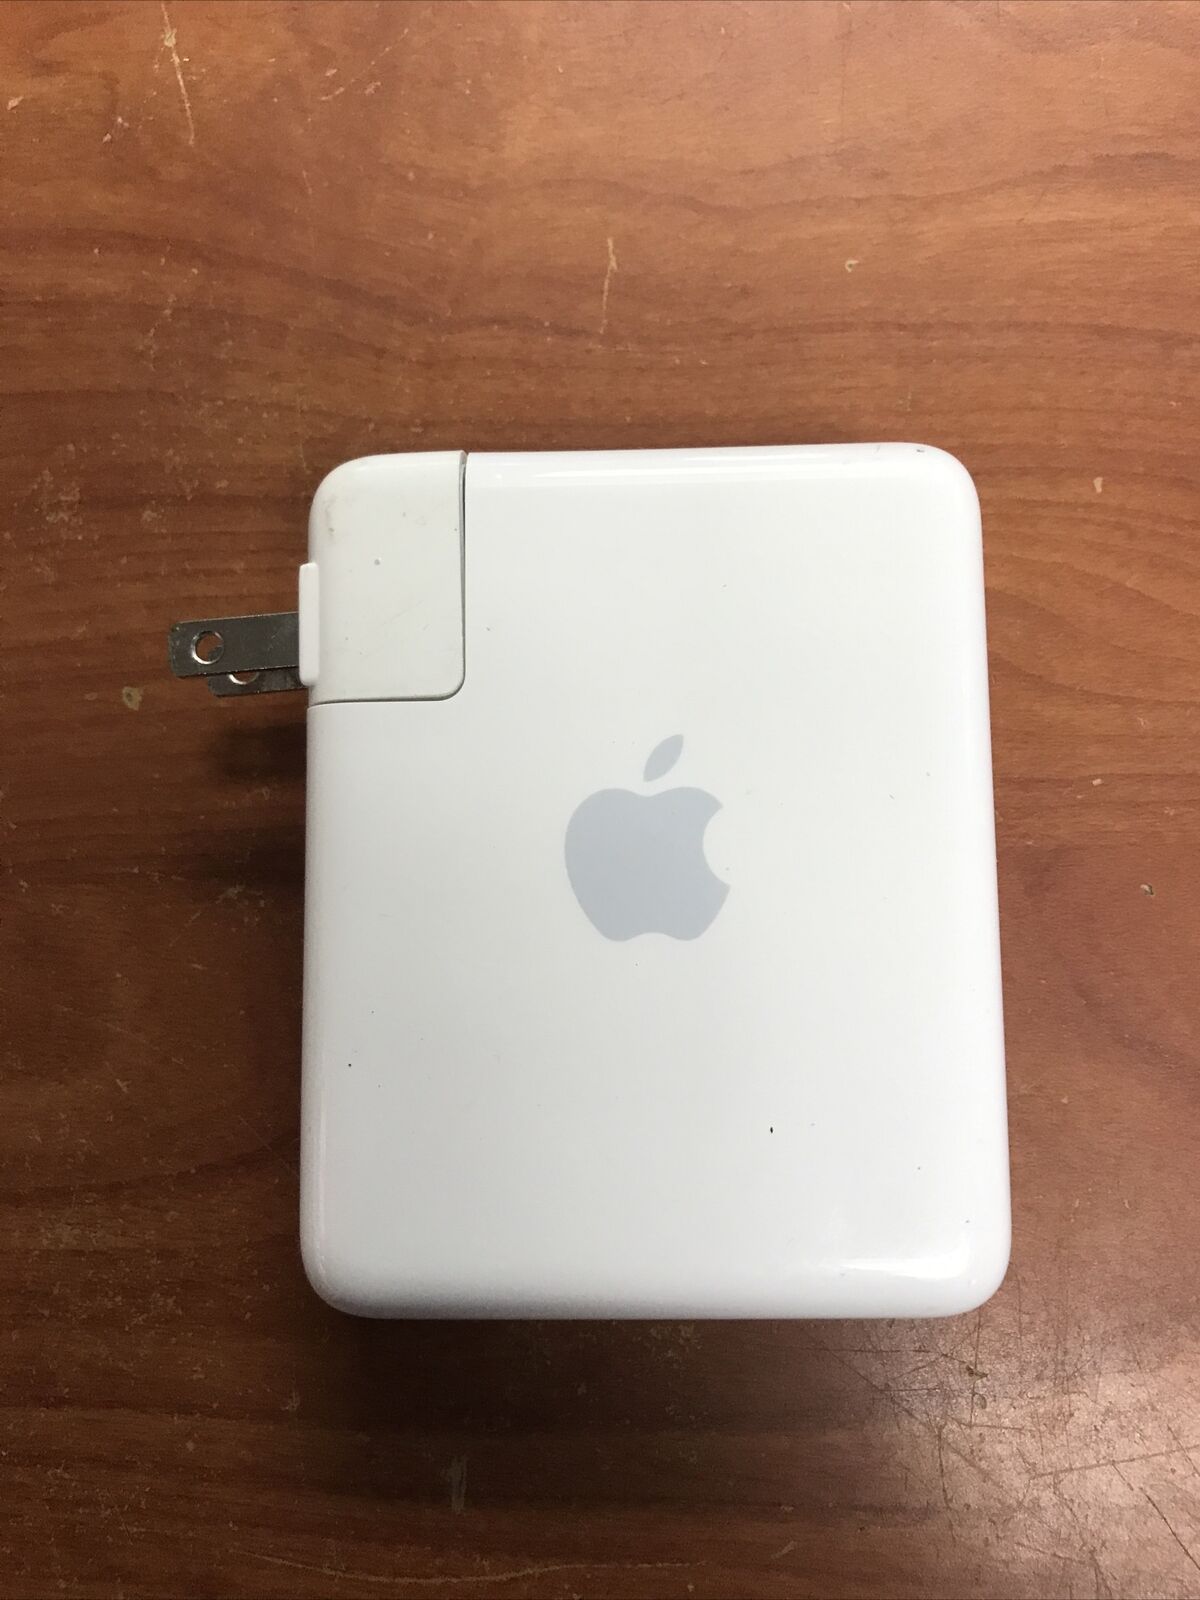 Apple Airport Express Wireless N Base Station - White A1264 - Airplay Ready